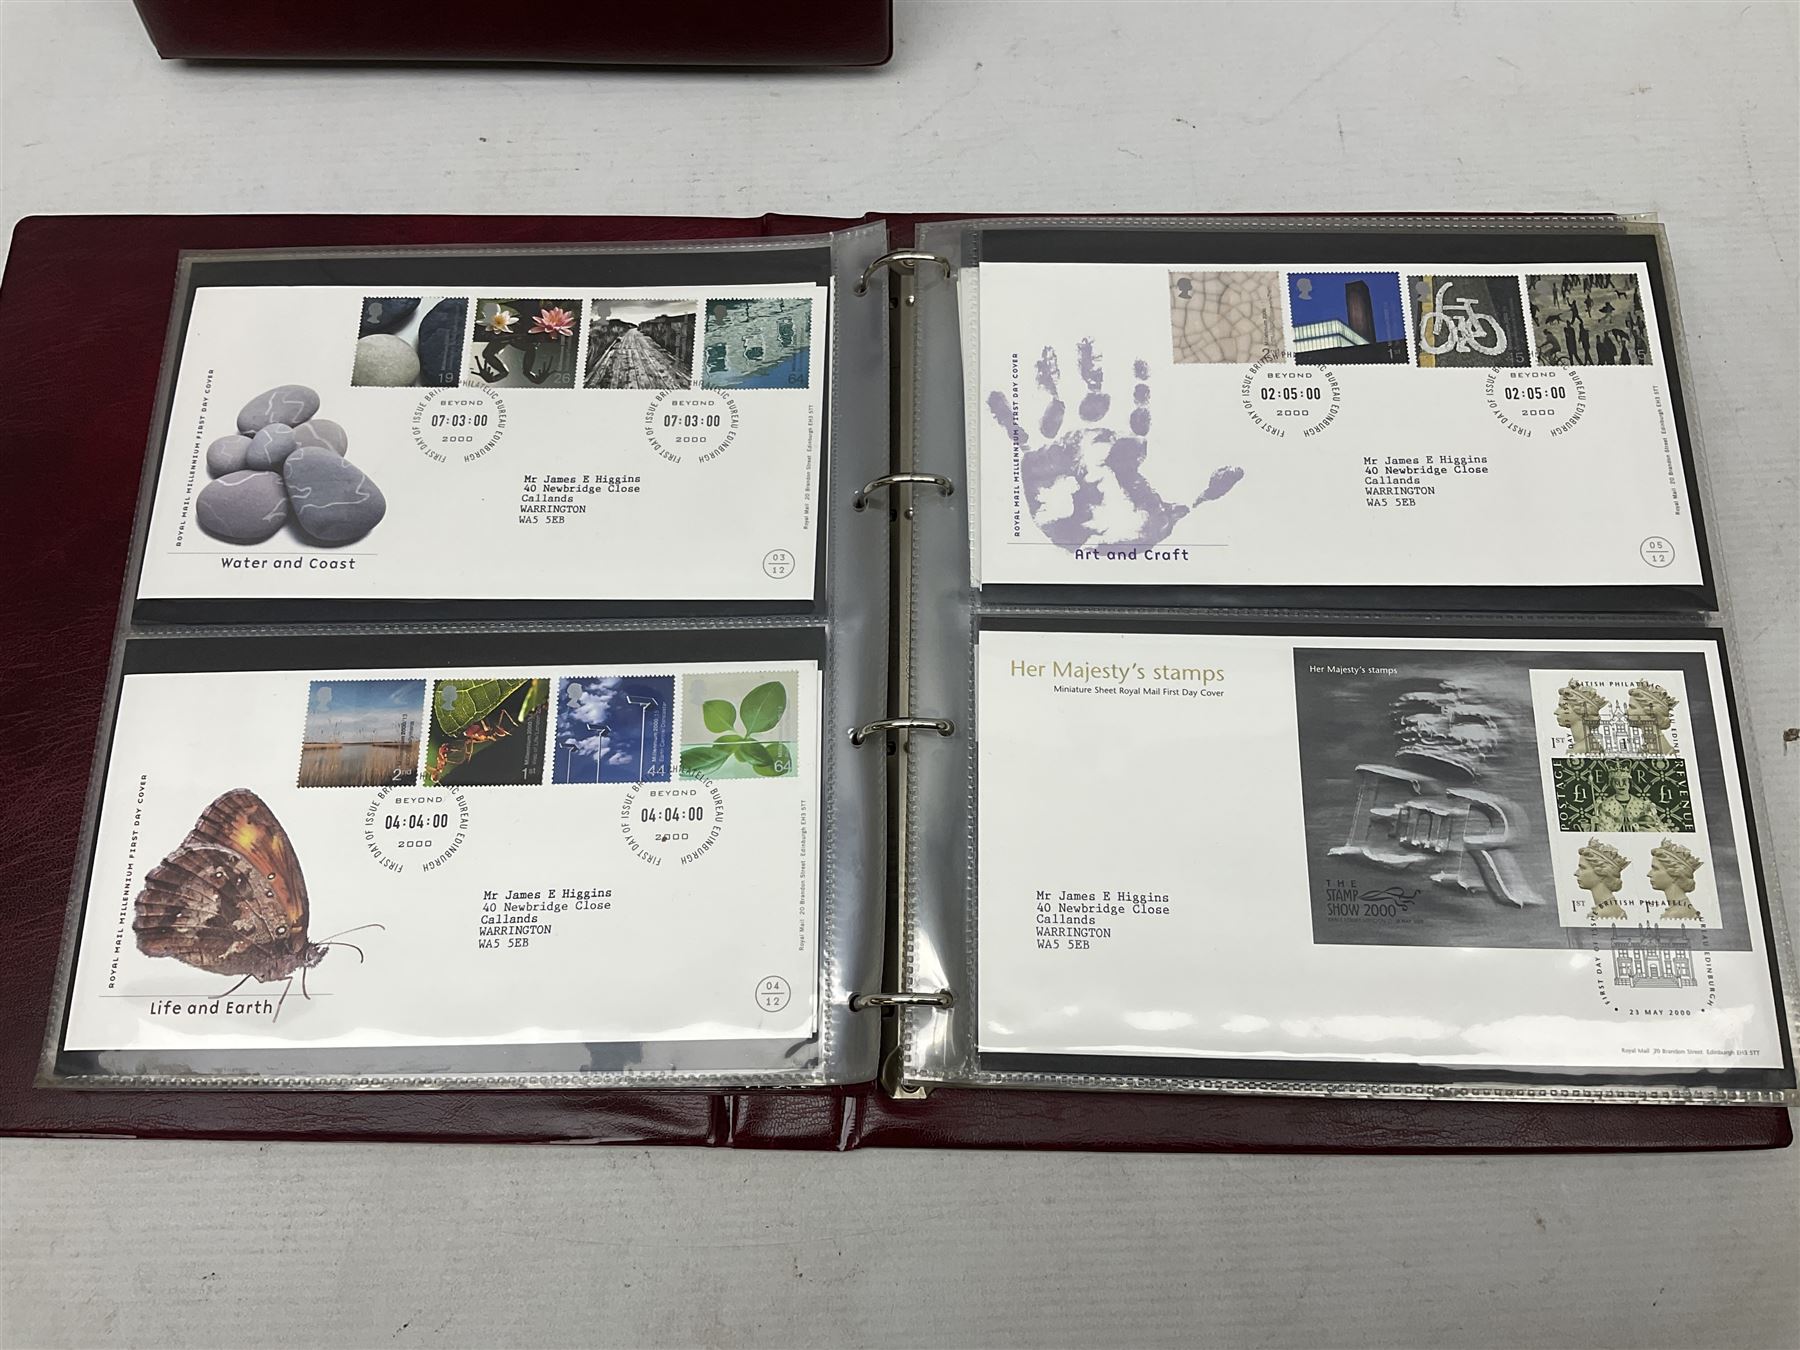 Great British Queen Elizabeth II first day covers including various issues for the Millennium etc - Image 11 of 13